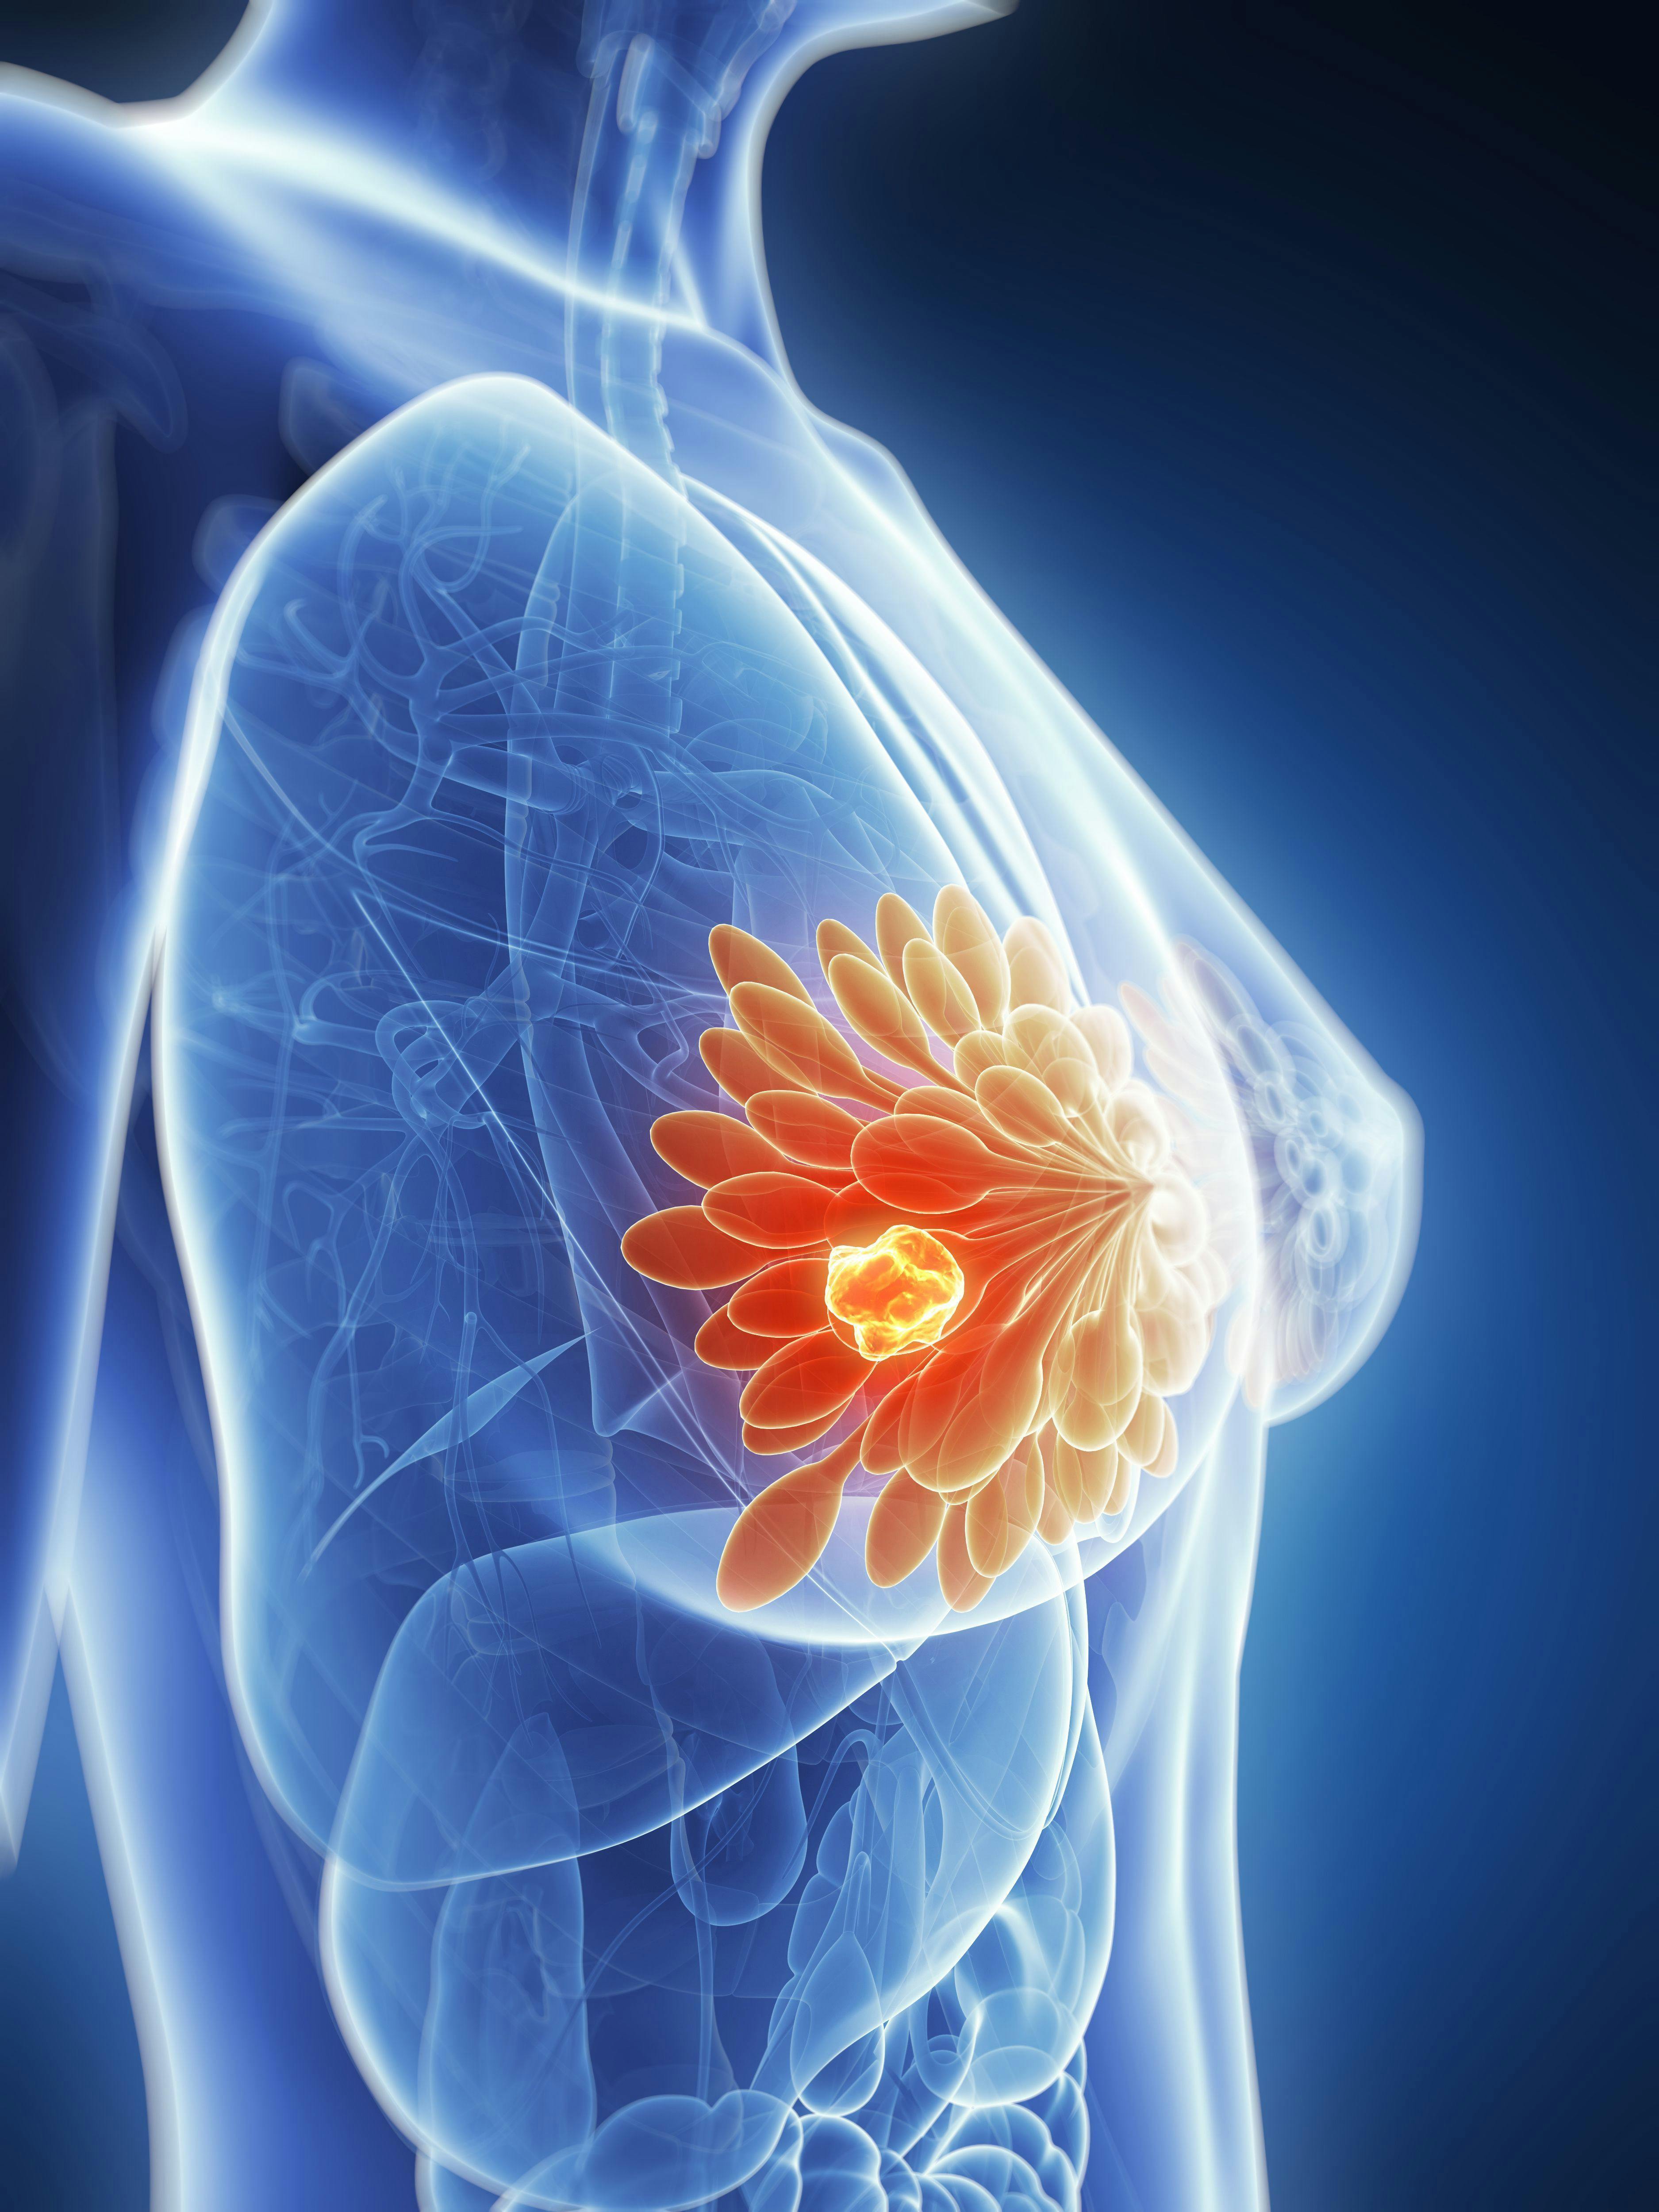 New ASTRO Guidelines Recommend Partial Breast Irradiation for Early-Stage Breast Cancer 